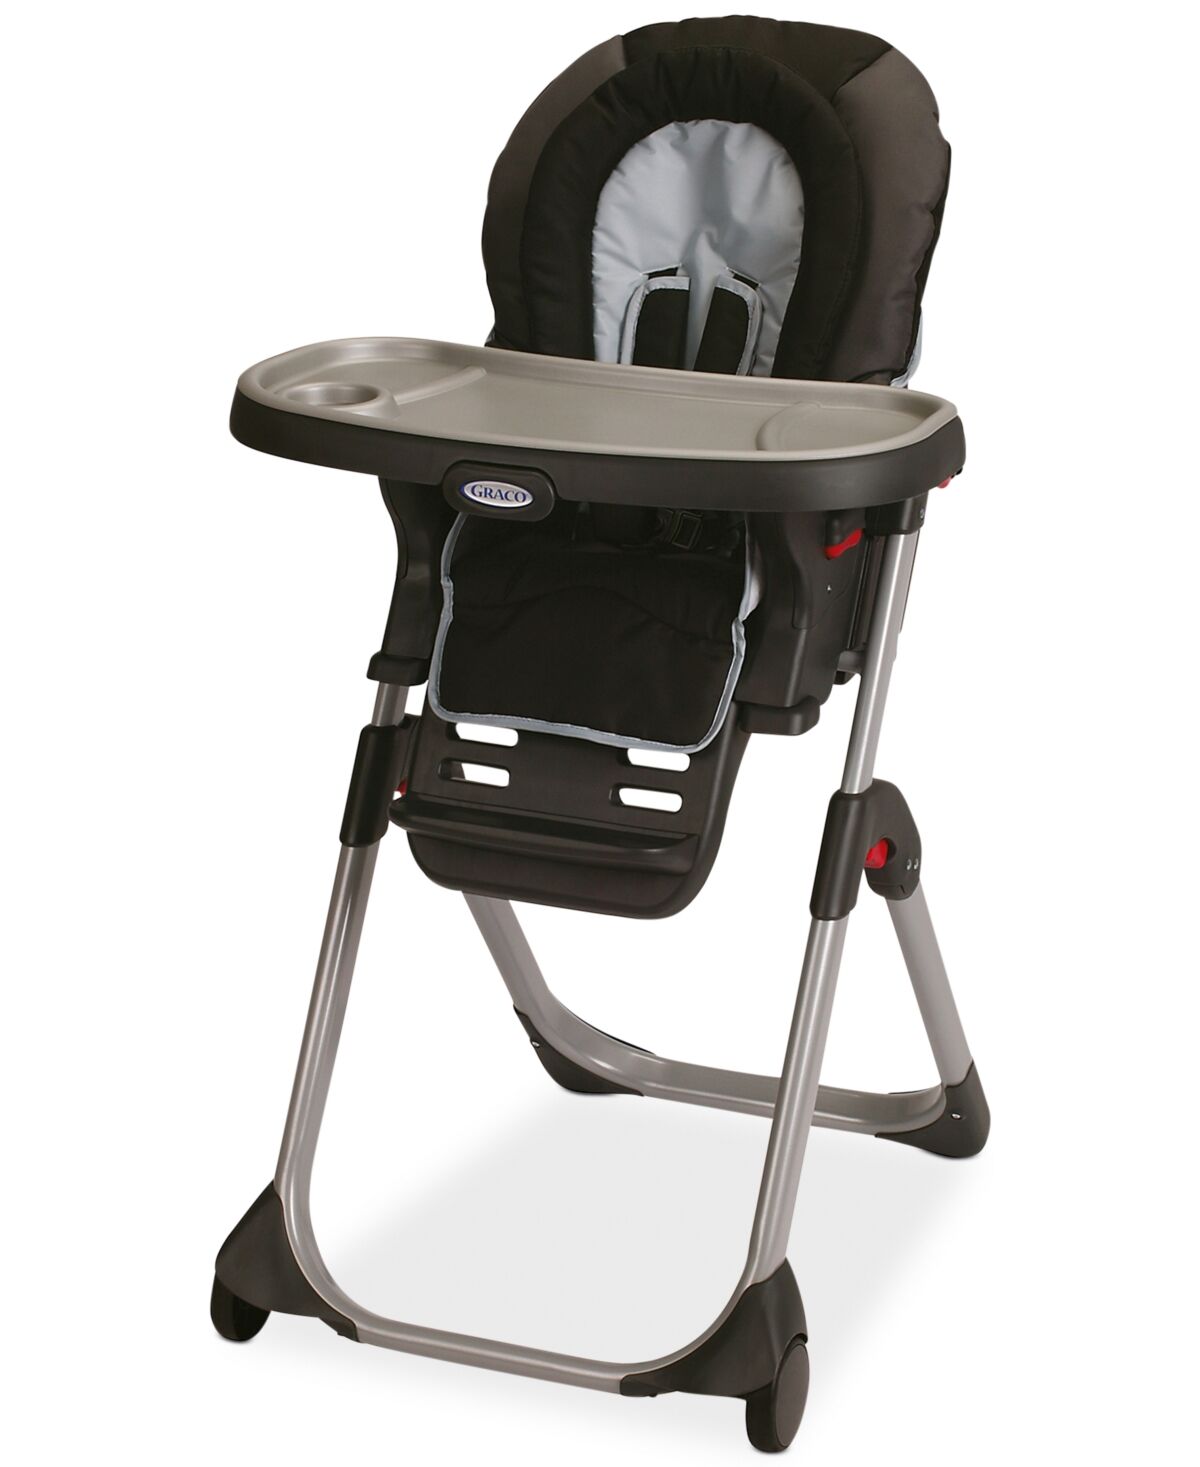 Graco Baby DuoDiner Lx Tanger High Chair - Metropolis